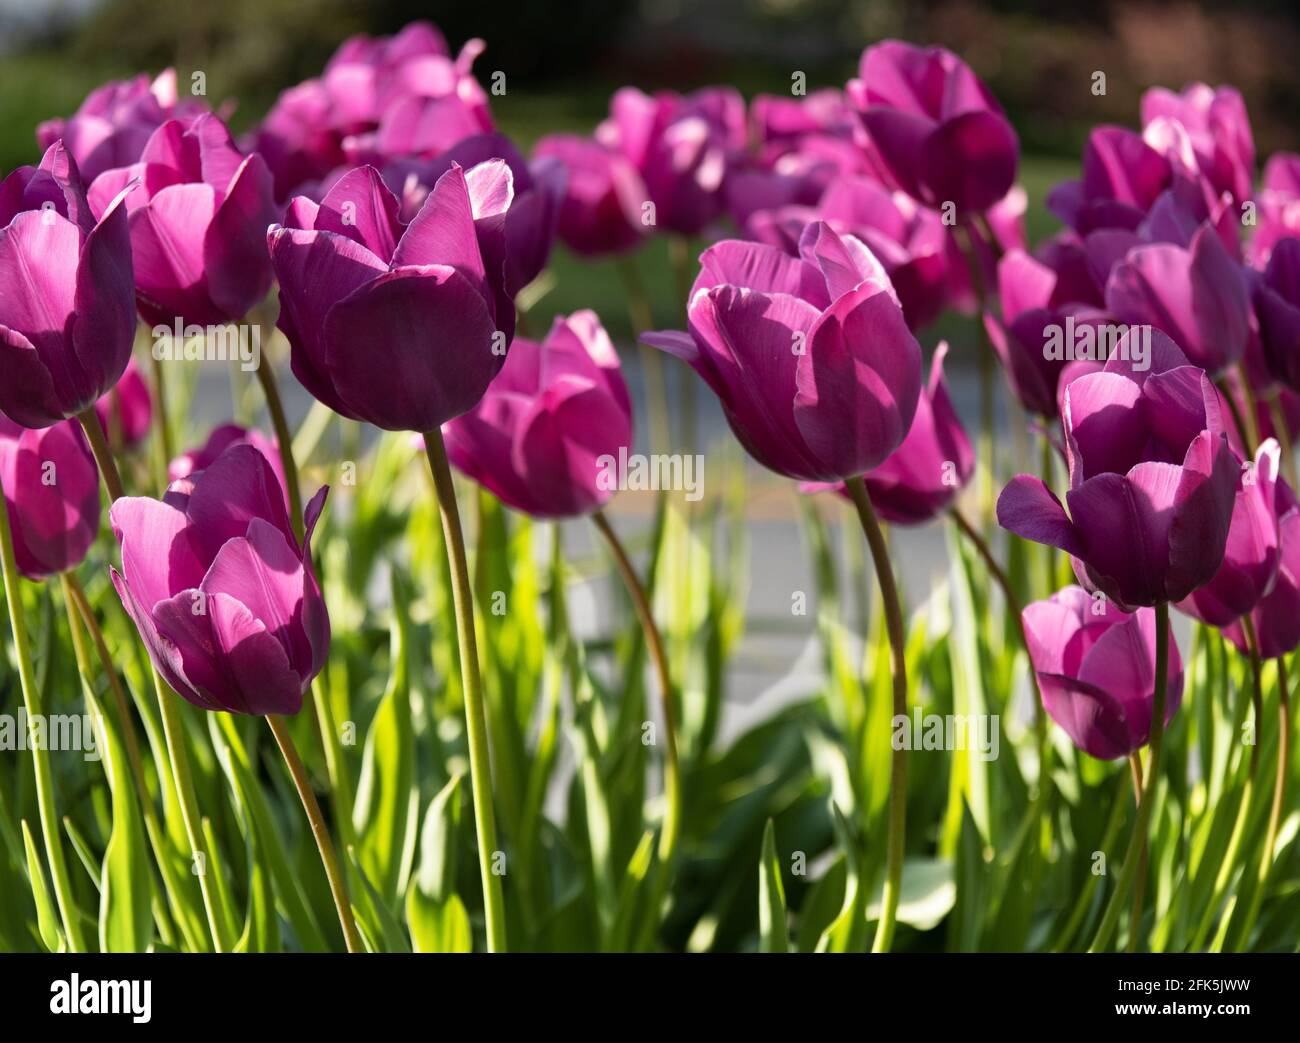 Sunlit Purple Tulips, Tulipa, with Green Leaves During Spring in Lancaster County, PennsylvaniaTulips, Tulipa, Stock Photo